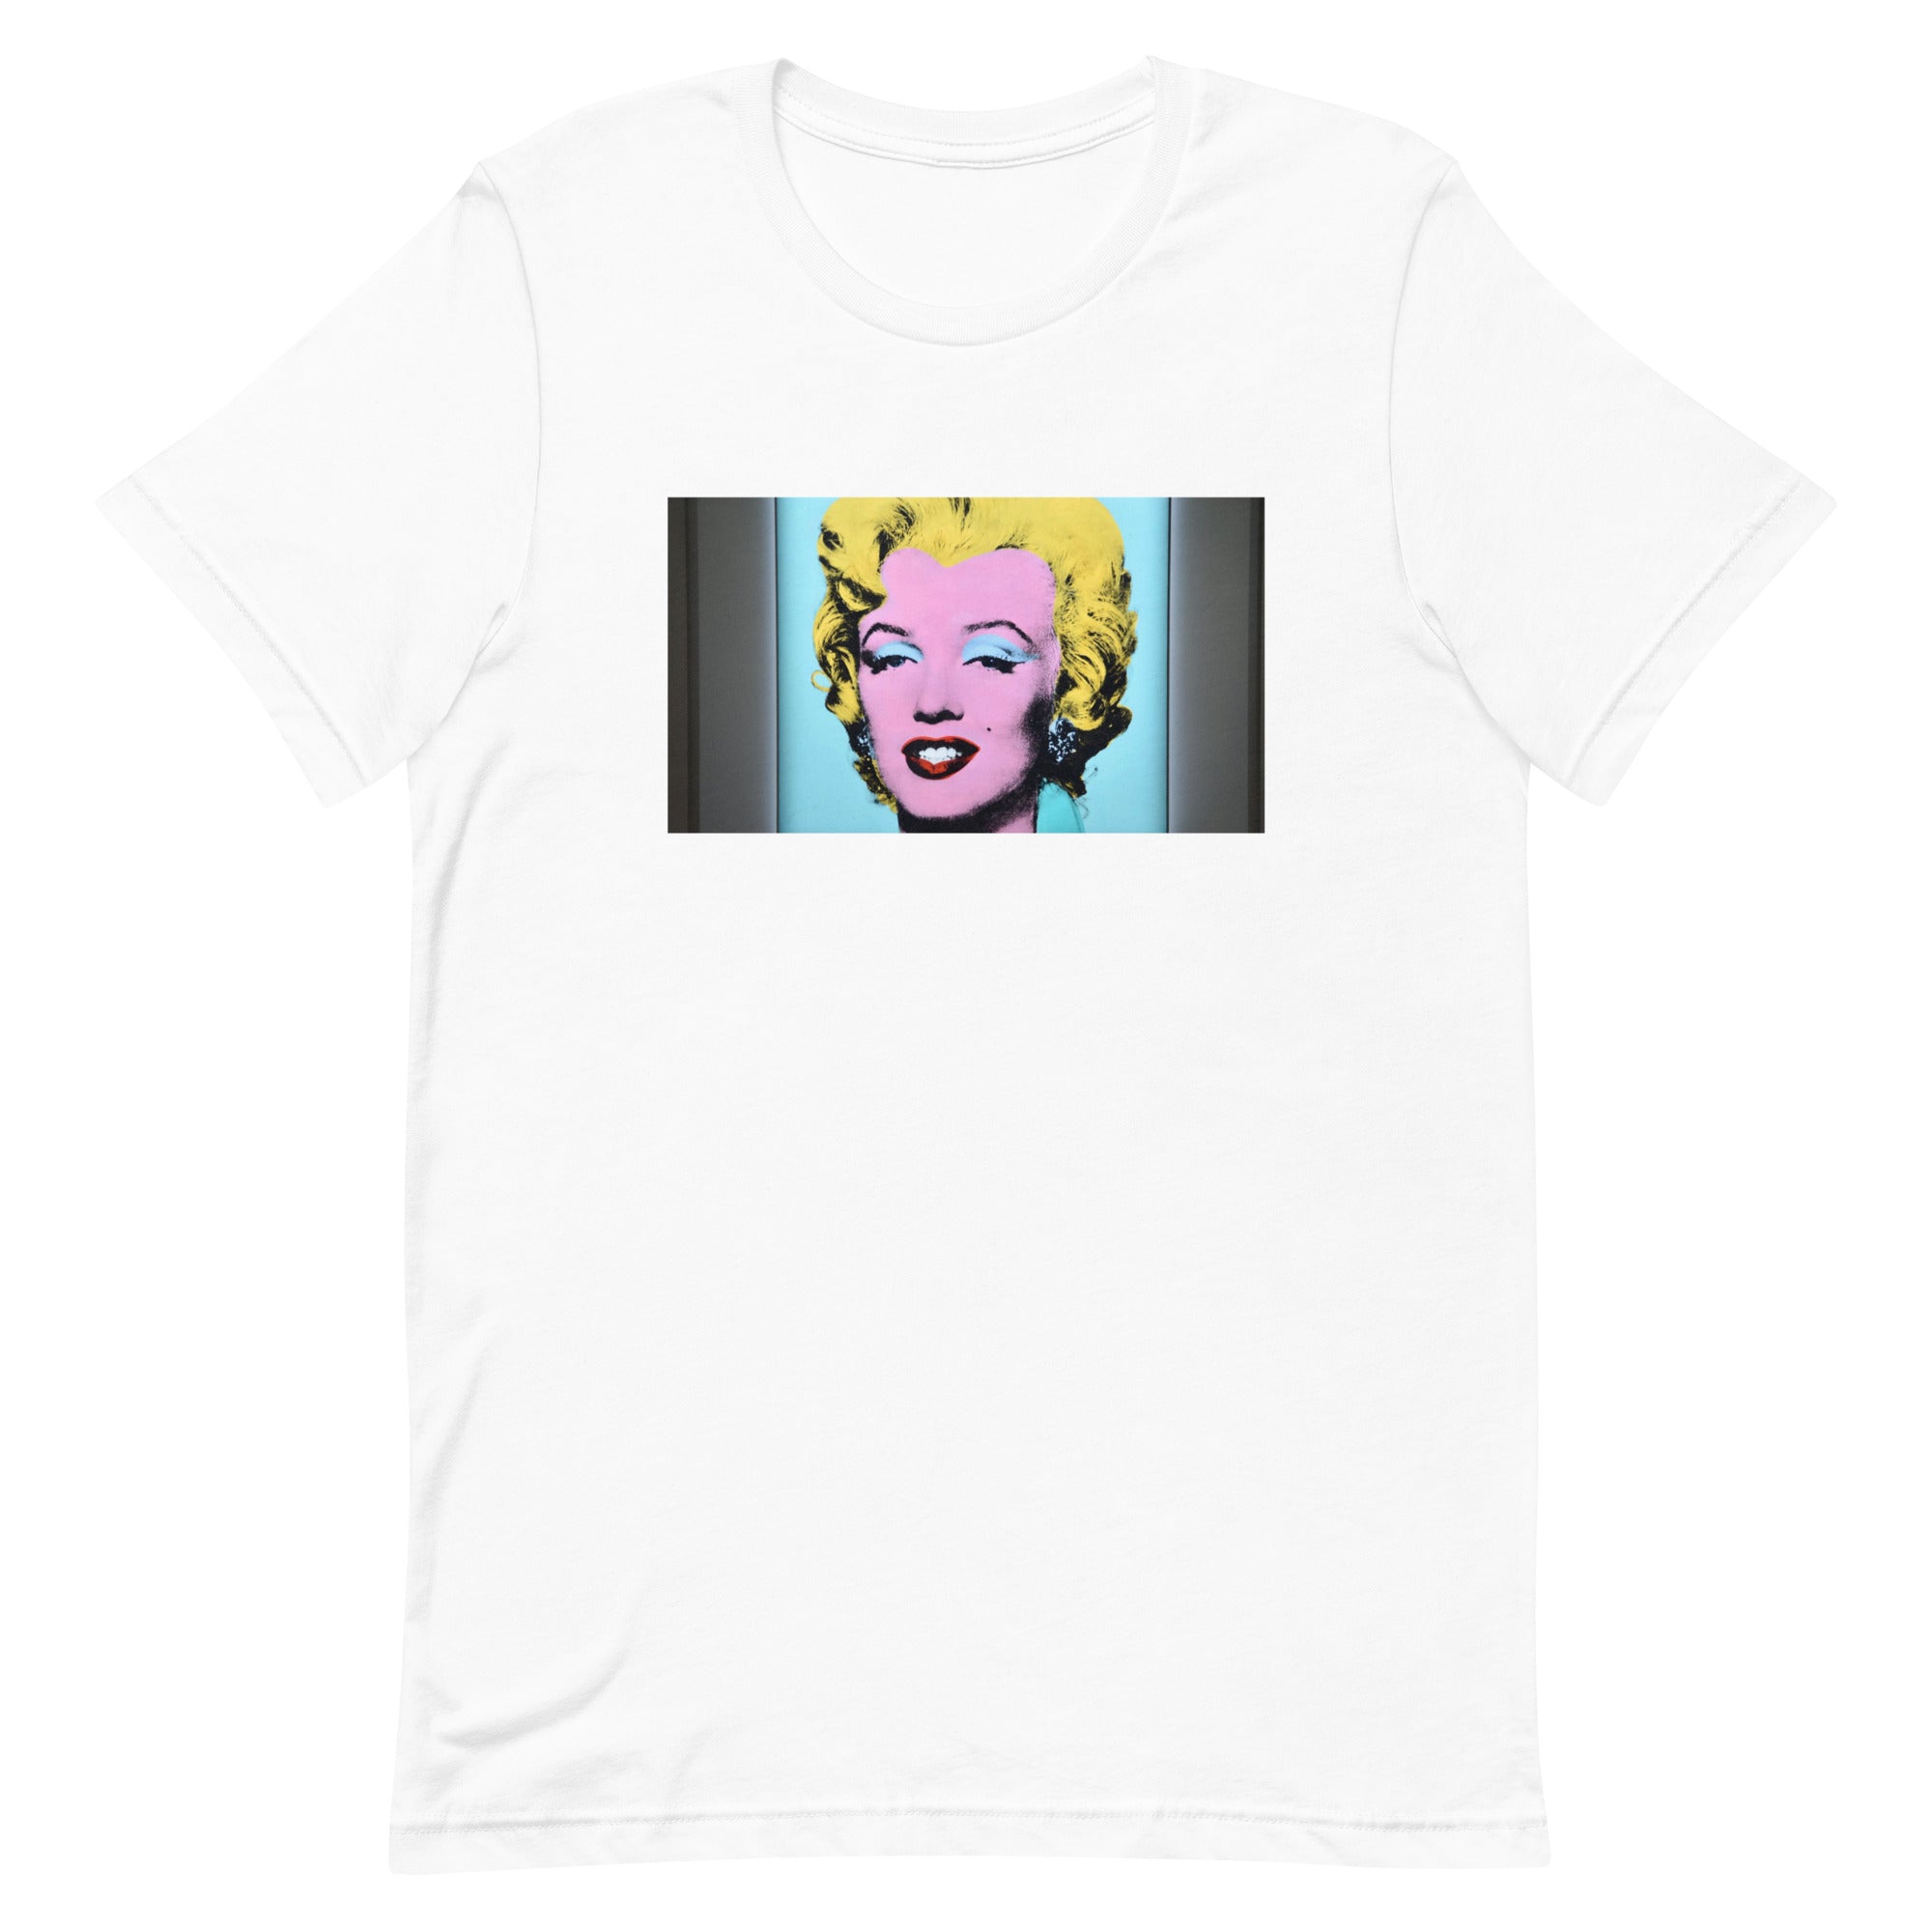 Shot Sage Blue Marilyn by Andy Warhol printed t shirt in black and white